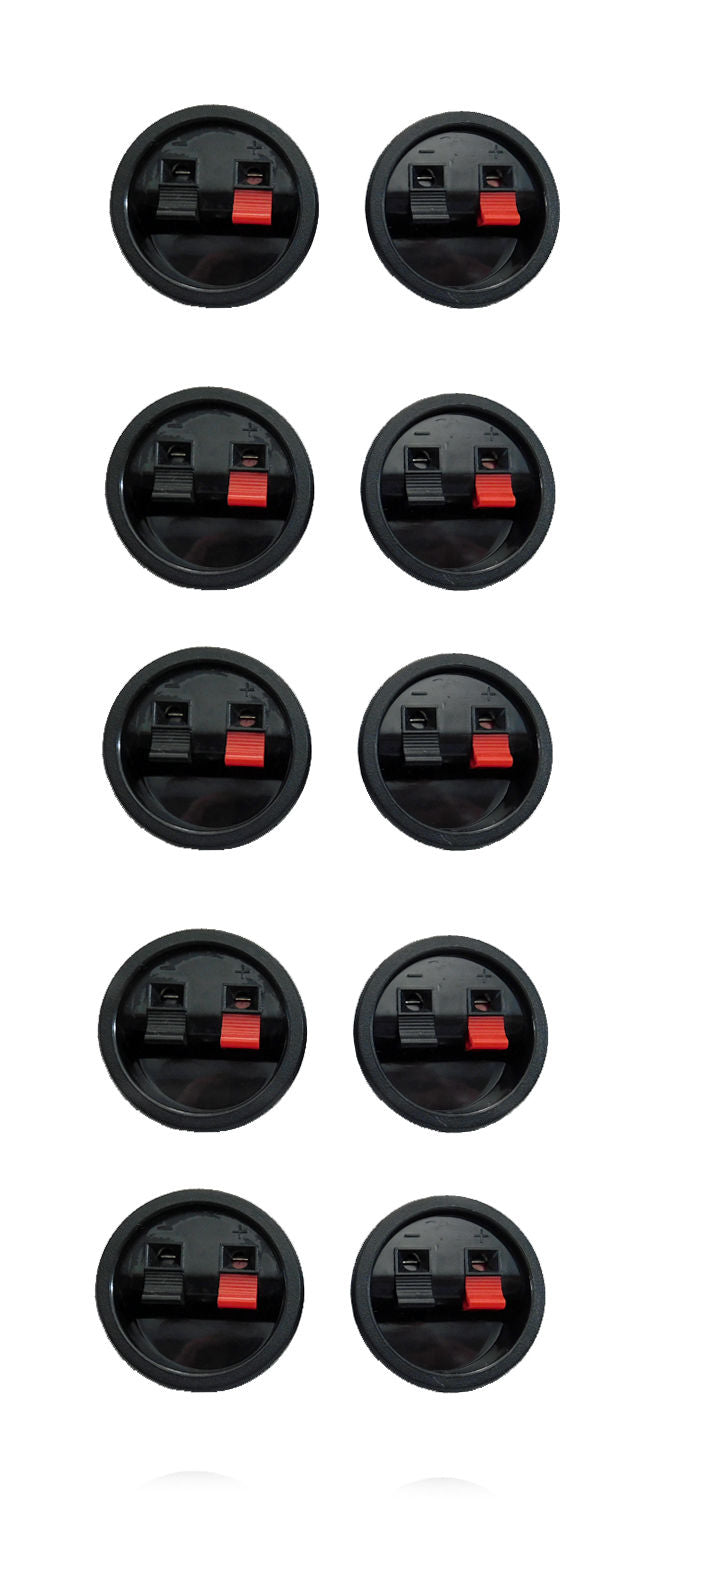 (10 PACK) PROCRAFT LHT095 Spring Loaded Press-In Speaker Terminal Cups - 1-7/8